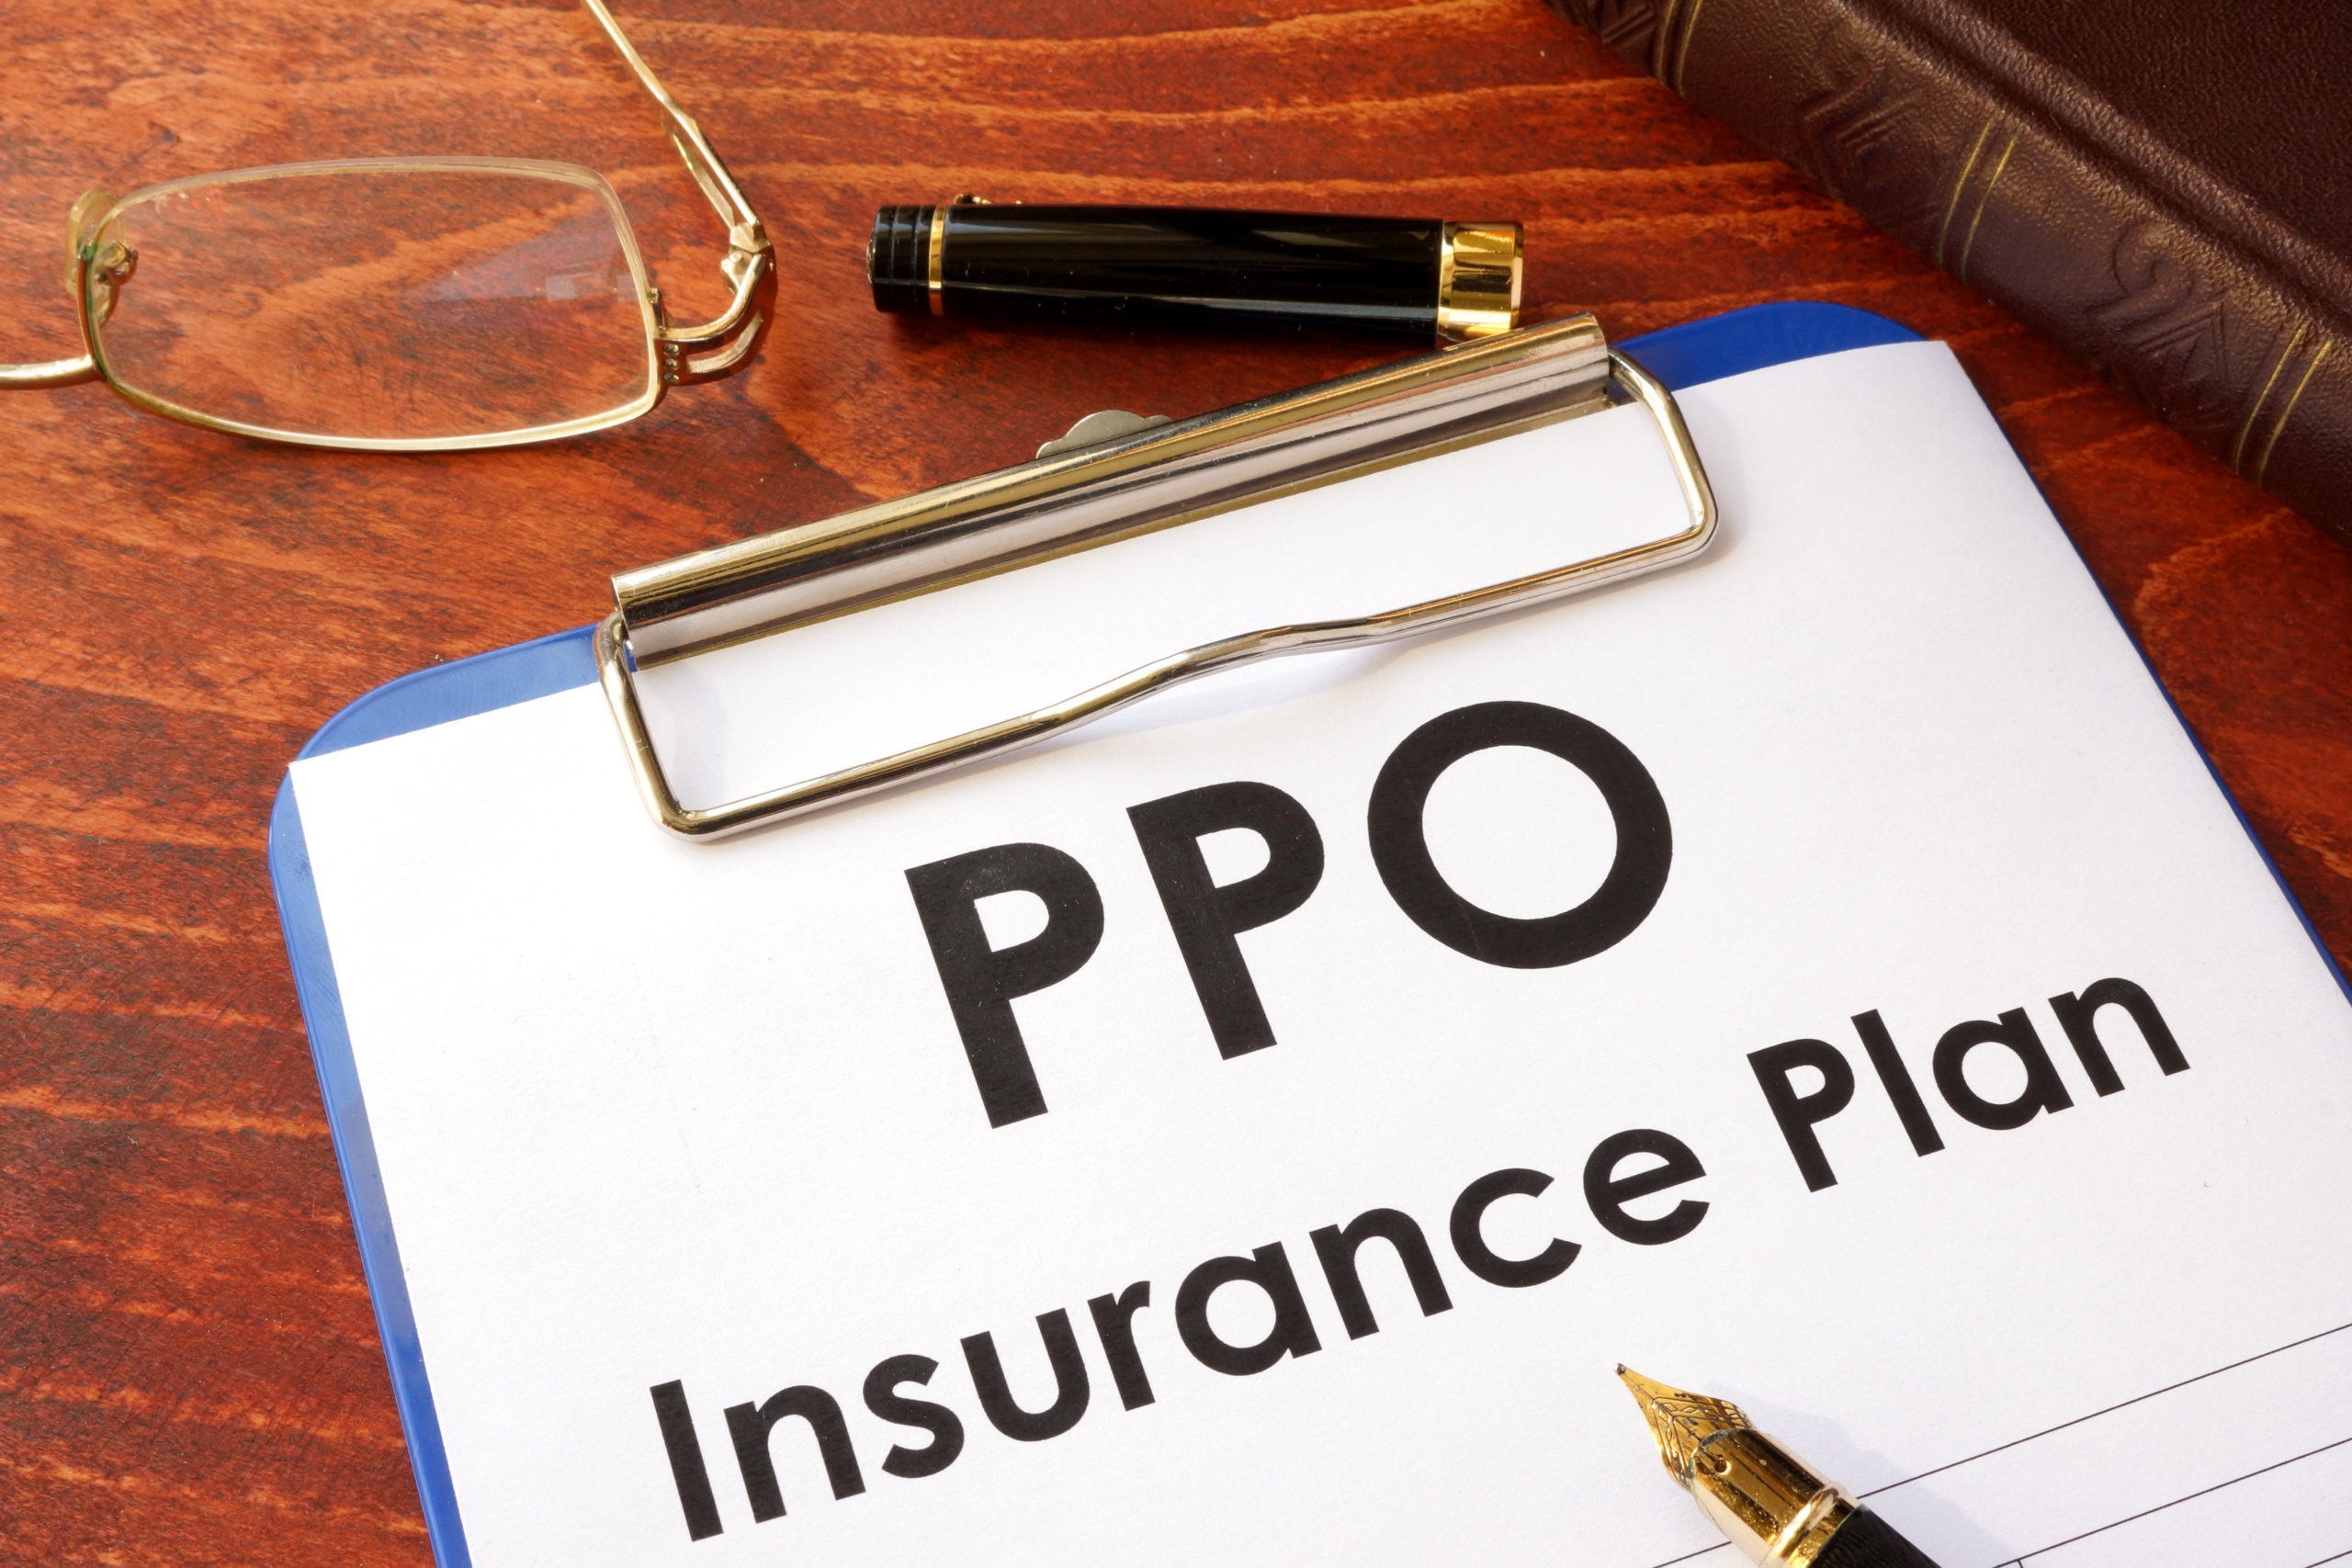 Preferred Provider Organization (PPO) Insurance can offer greater freedom than other coverage plans